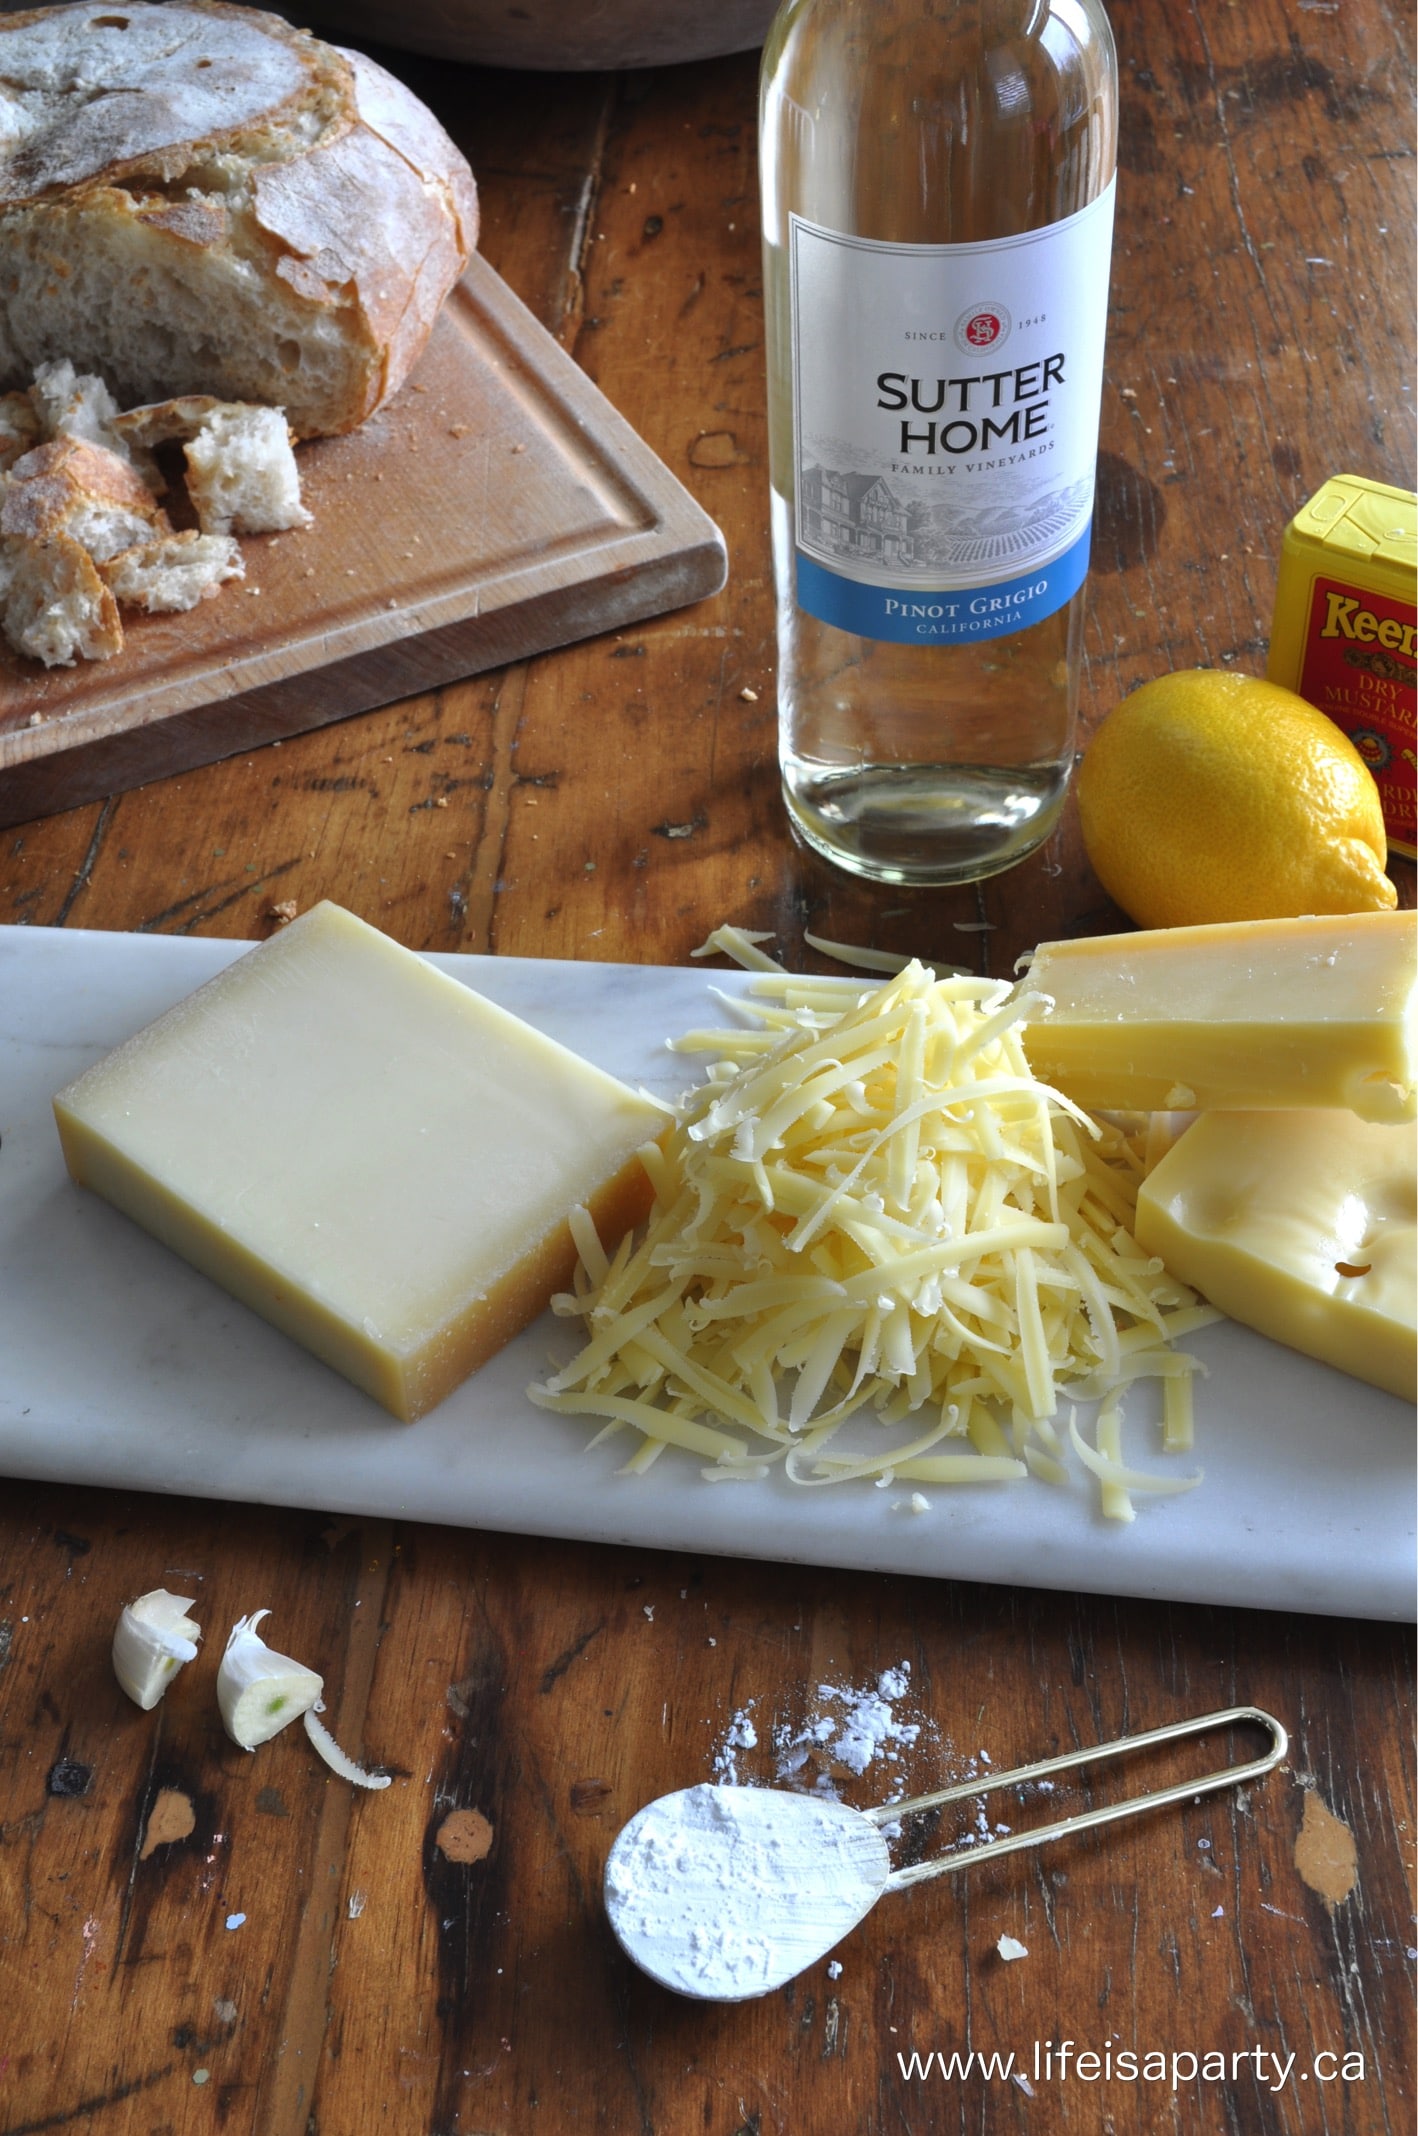 shredded cheese and wine and ingredients for a cheese fondue